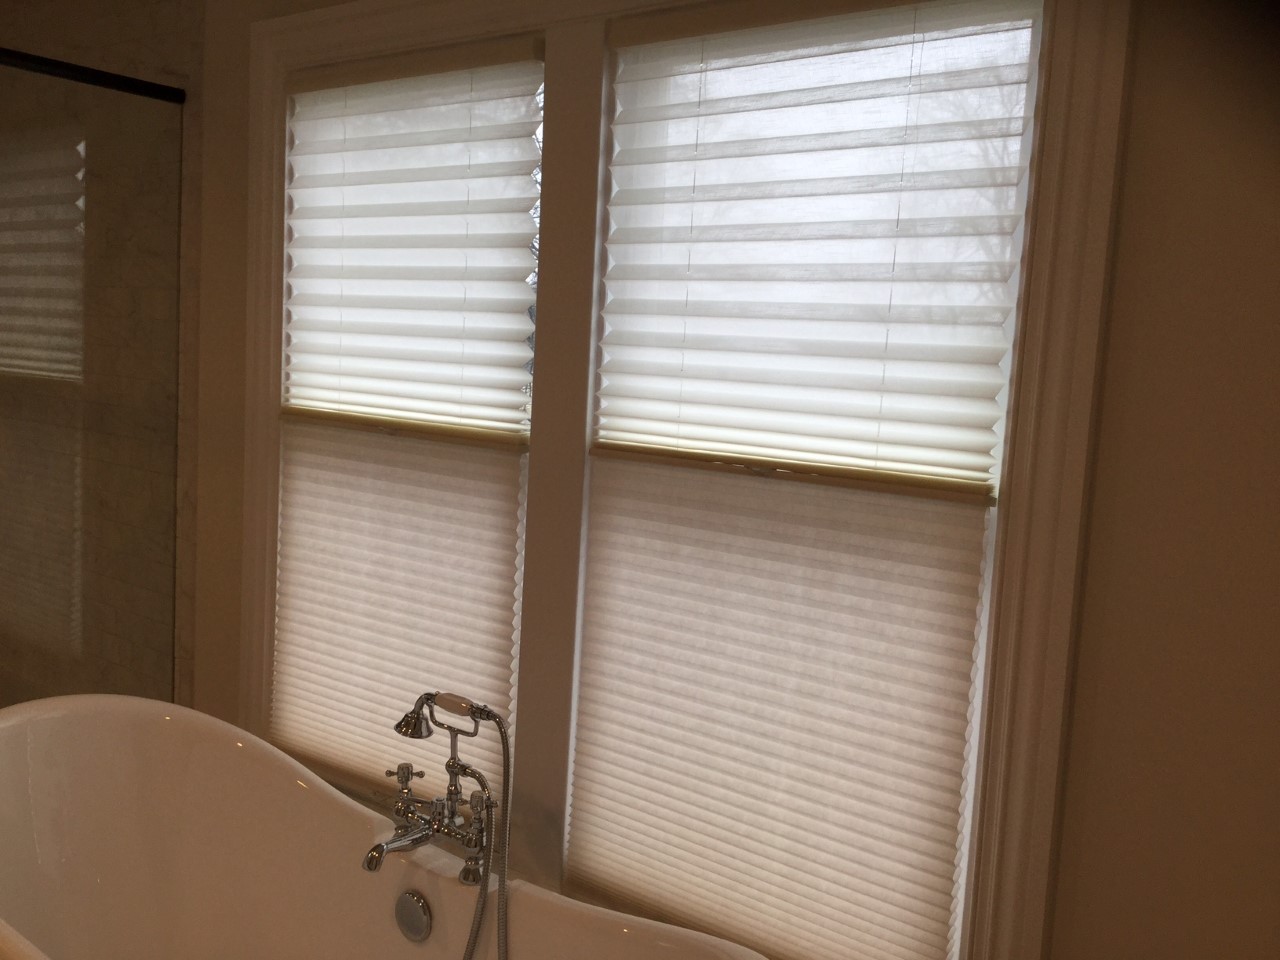 Tri-light honeycomb shades with pleated sheer top